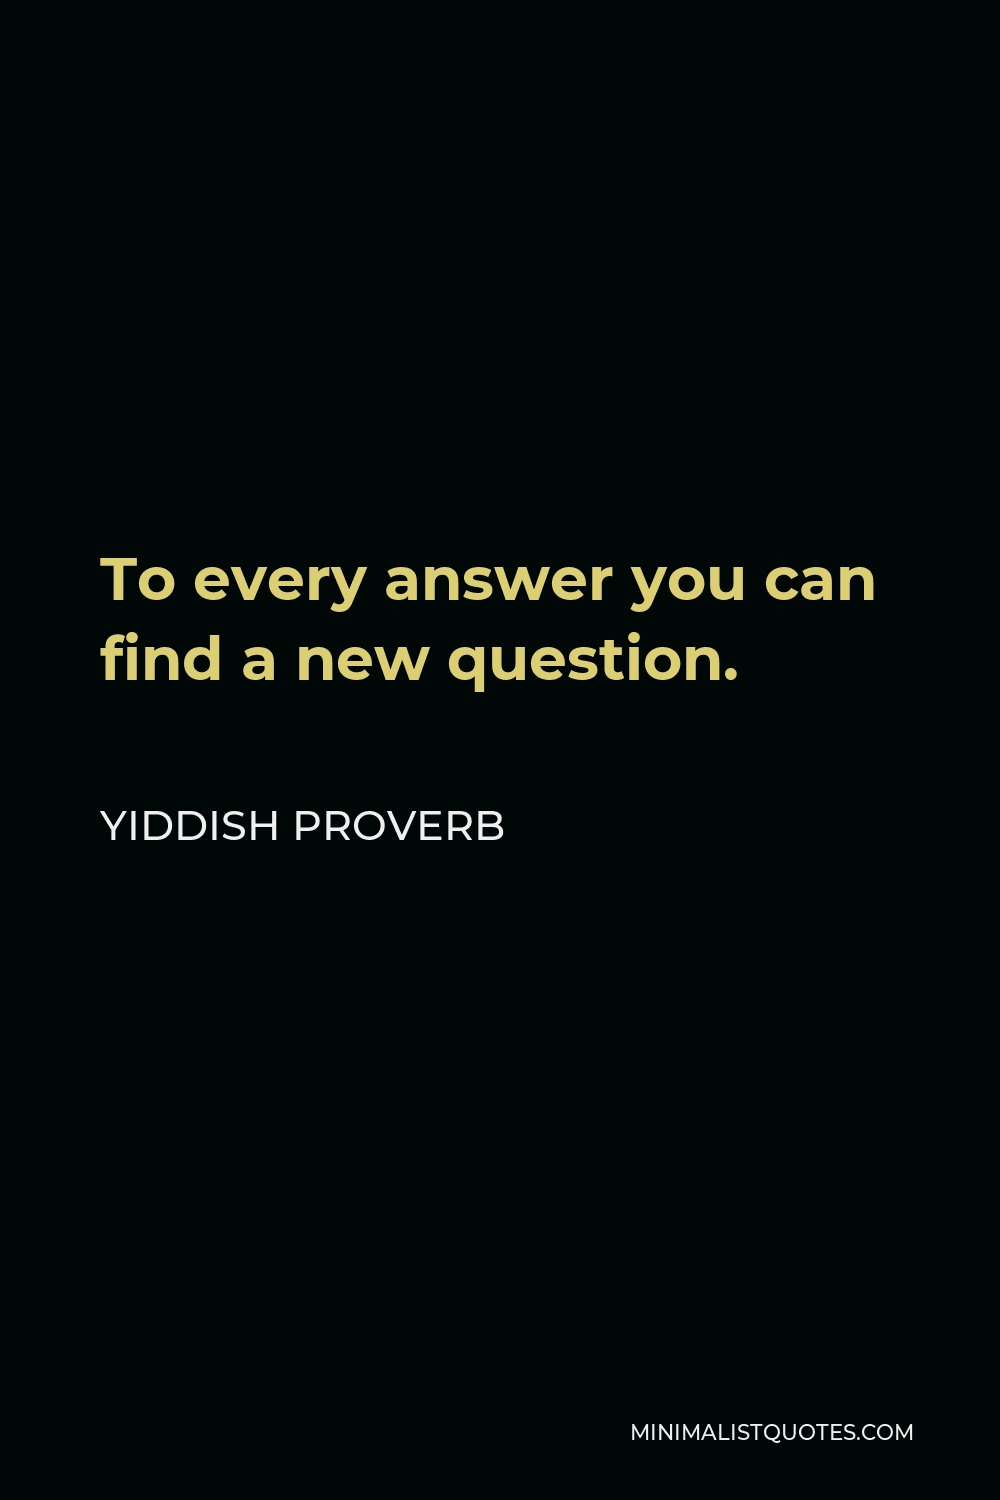 Yiddish Proverb Quote - To every answer you can find a new question.